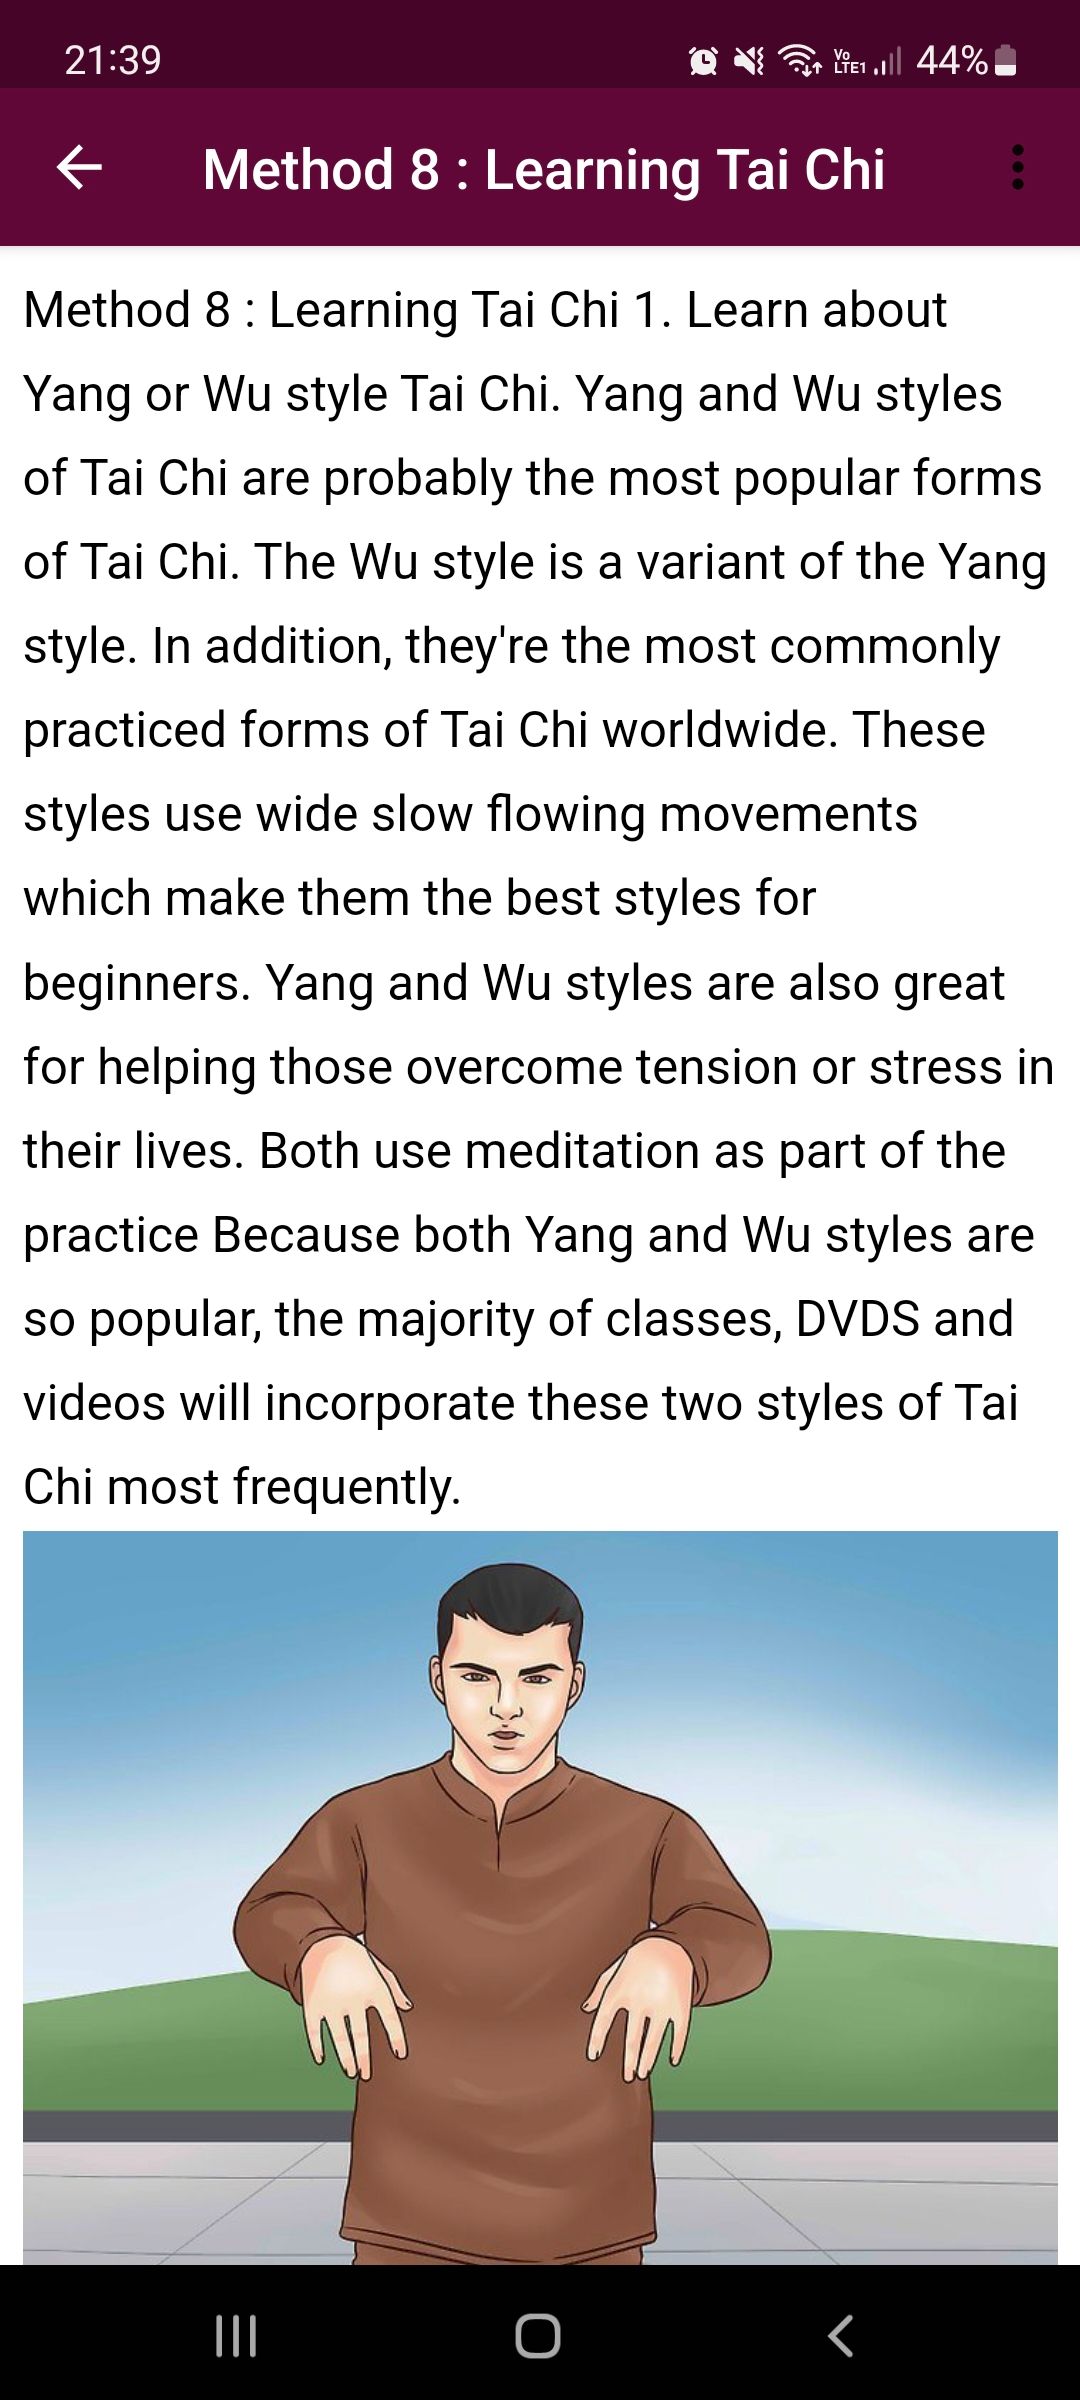 How To Do Tai Chi mobile app learning tai chi lesson